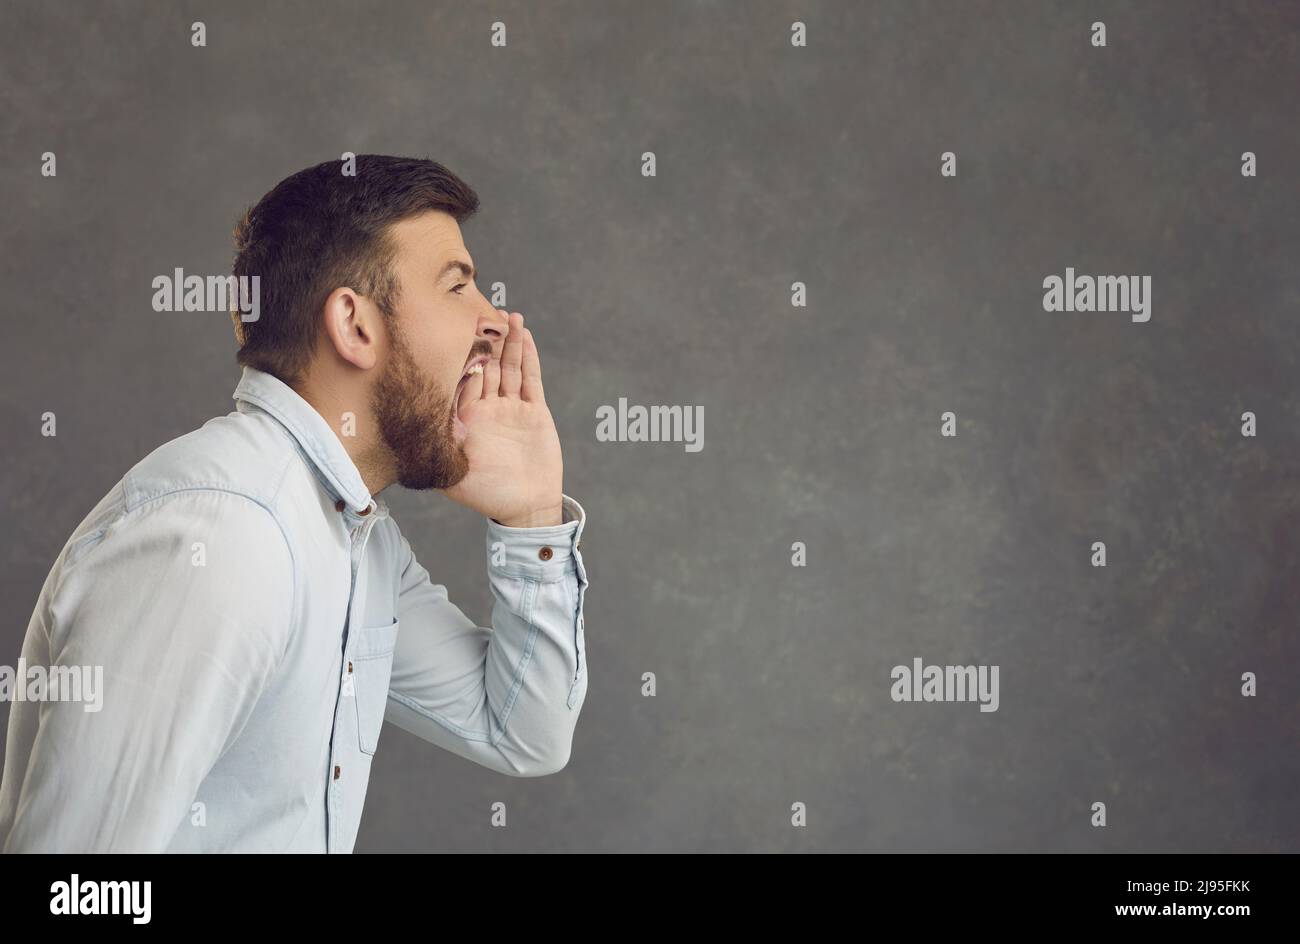 Side profile portrait of a man on a gray background who shouts announcing promotional information. Stock Photo